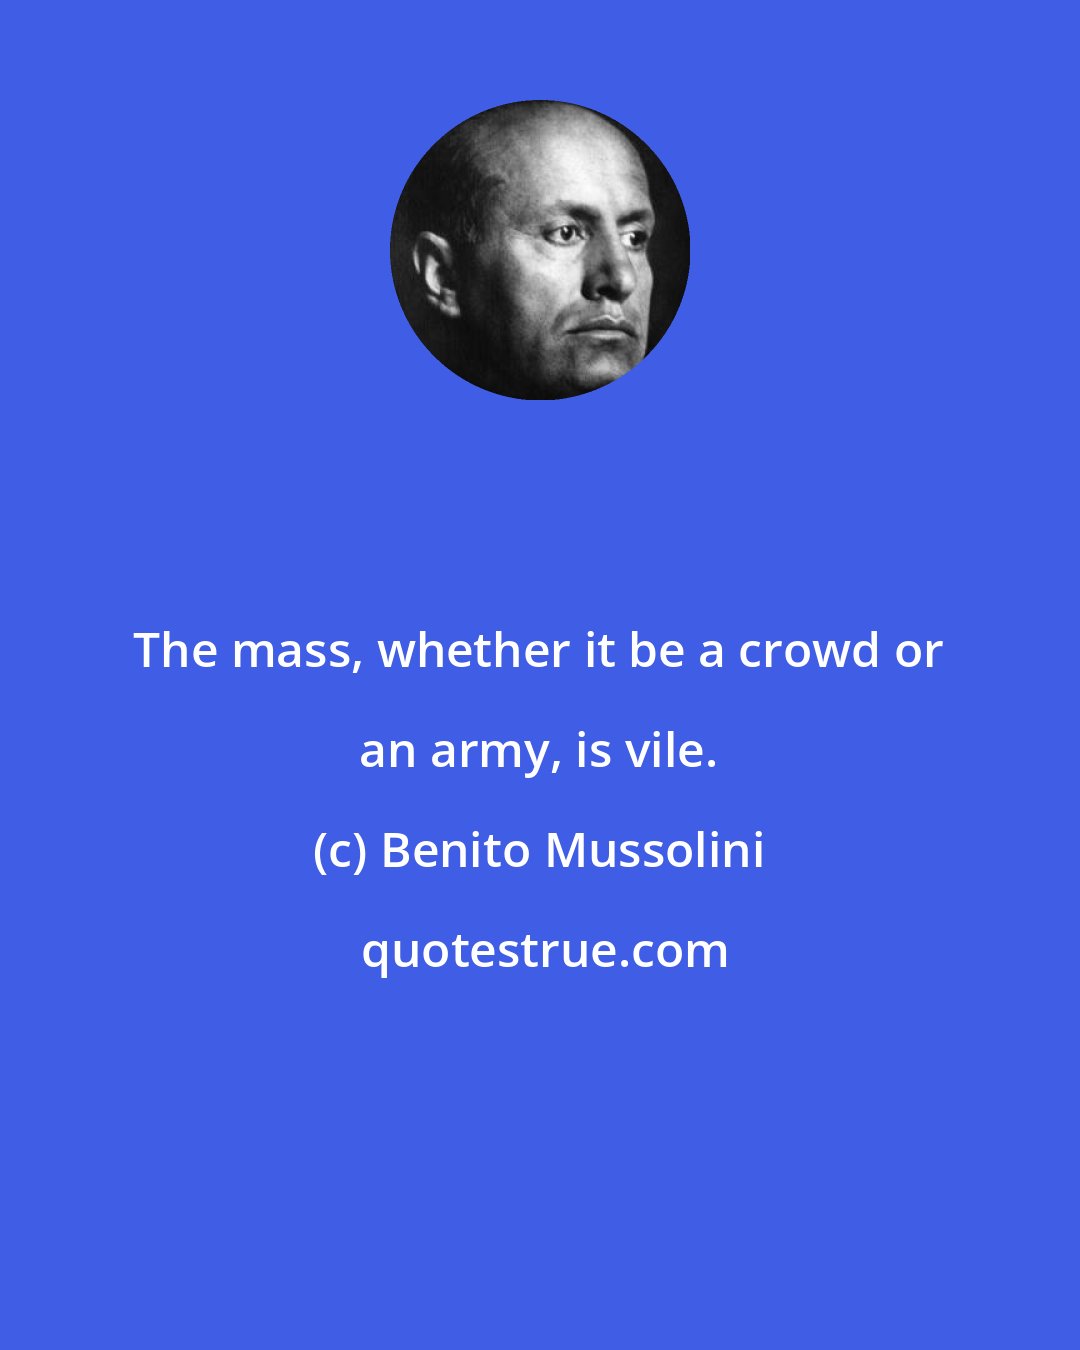 Benito Mussolini: The mass, whether it be a crowd or an army, is vile.